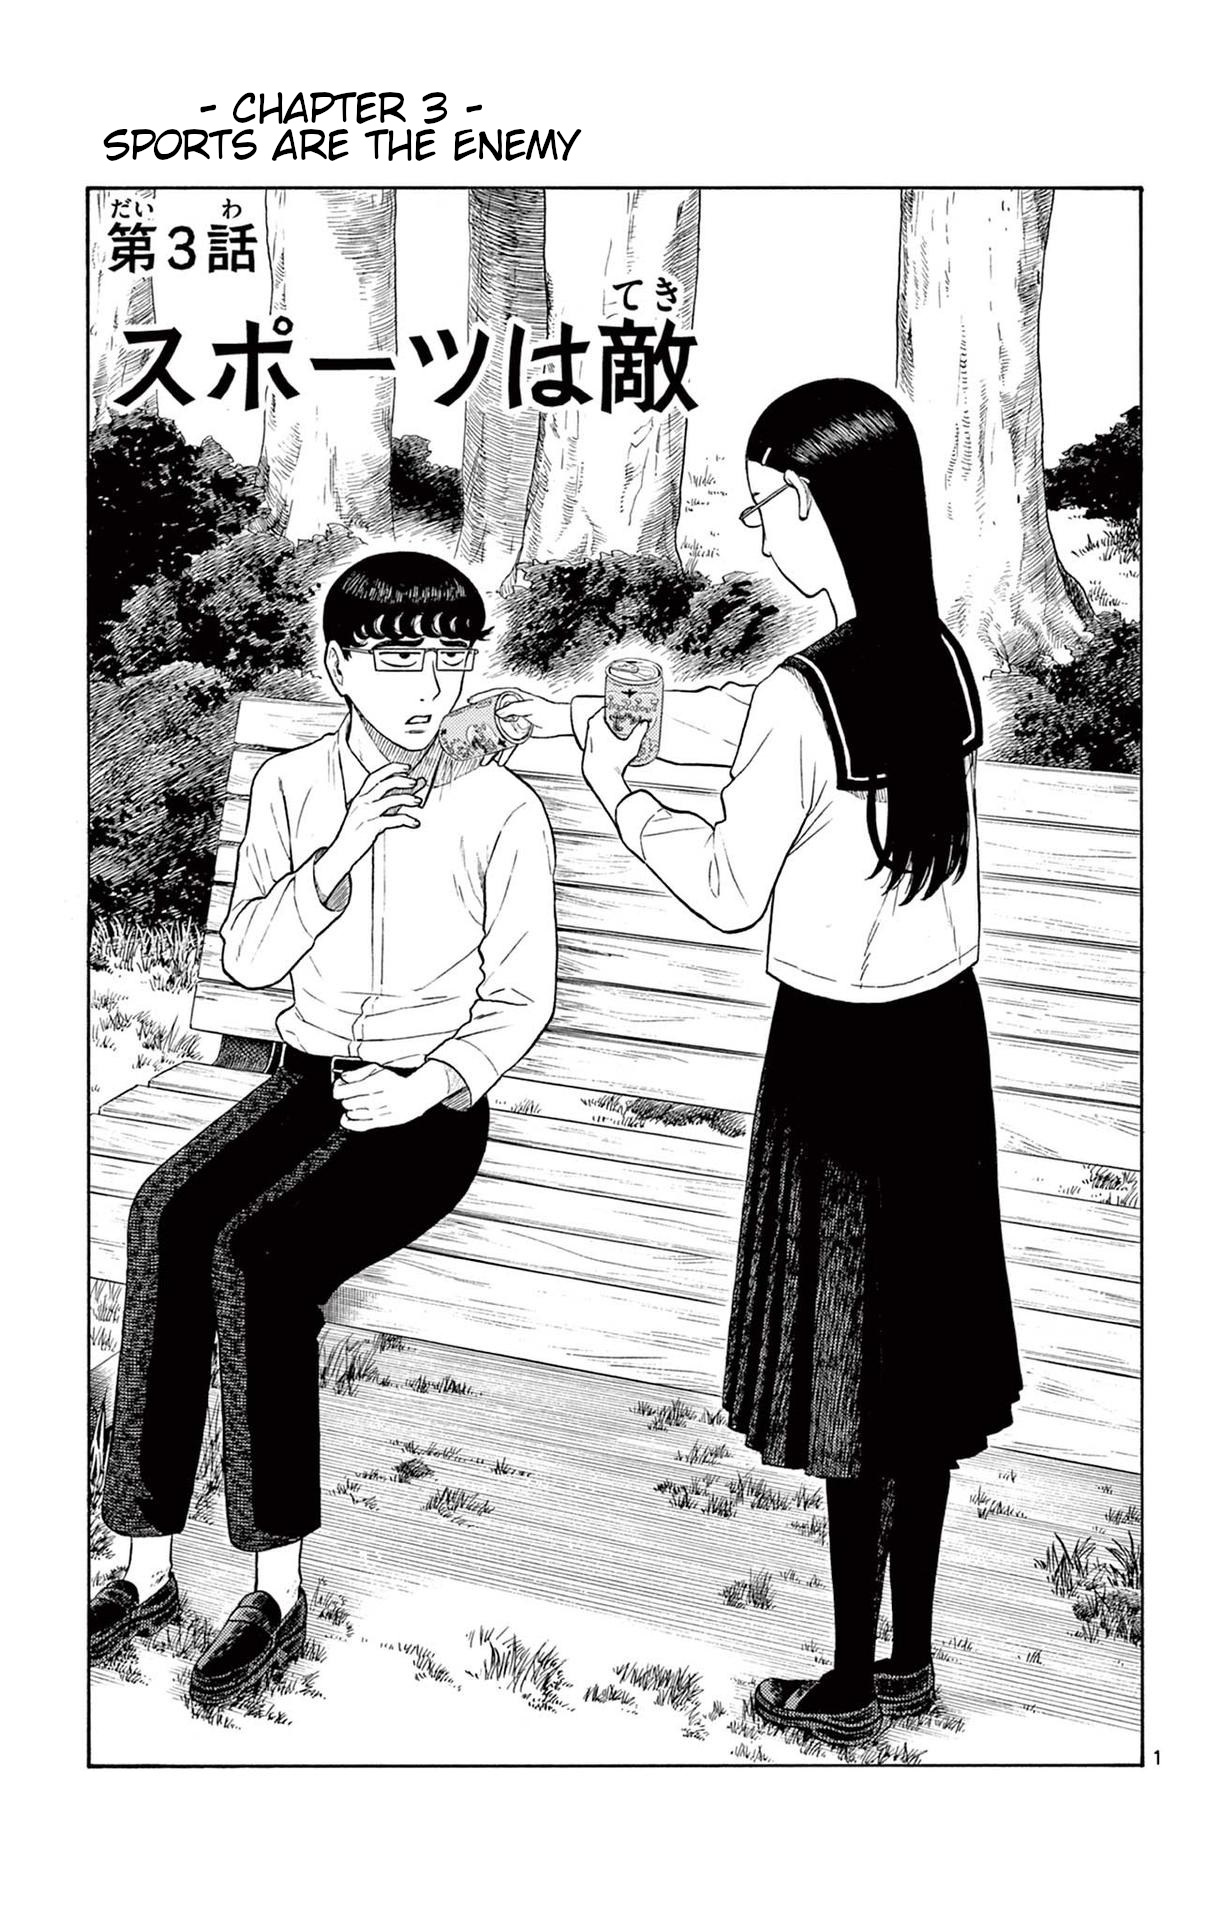 Shiroyama To Mita-San Vol.1 Chapter 3: Sports Are The Enemy - Picture 1